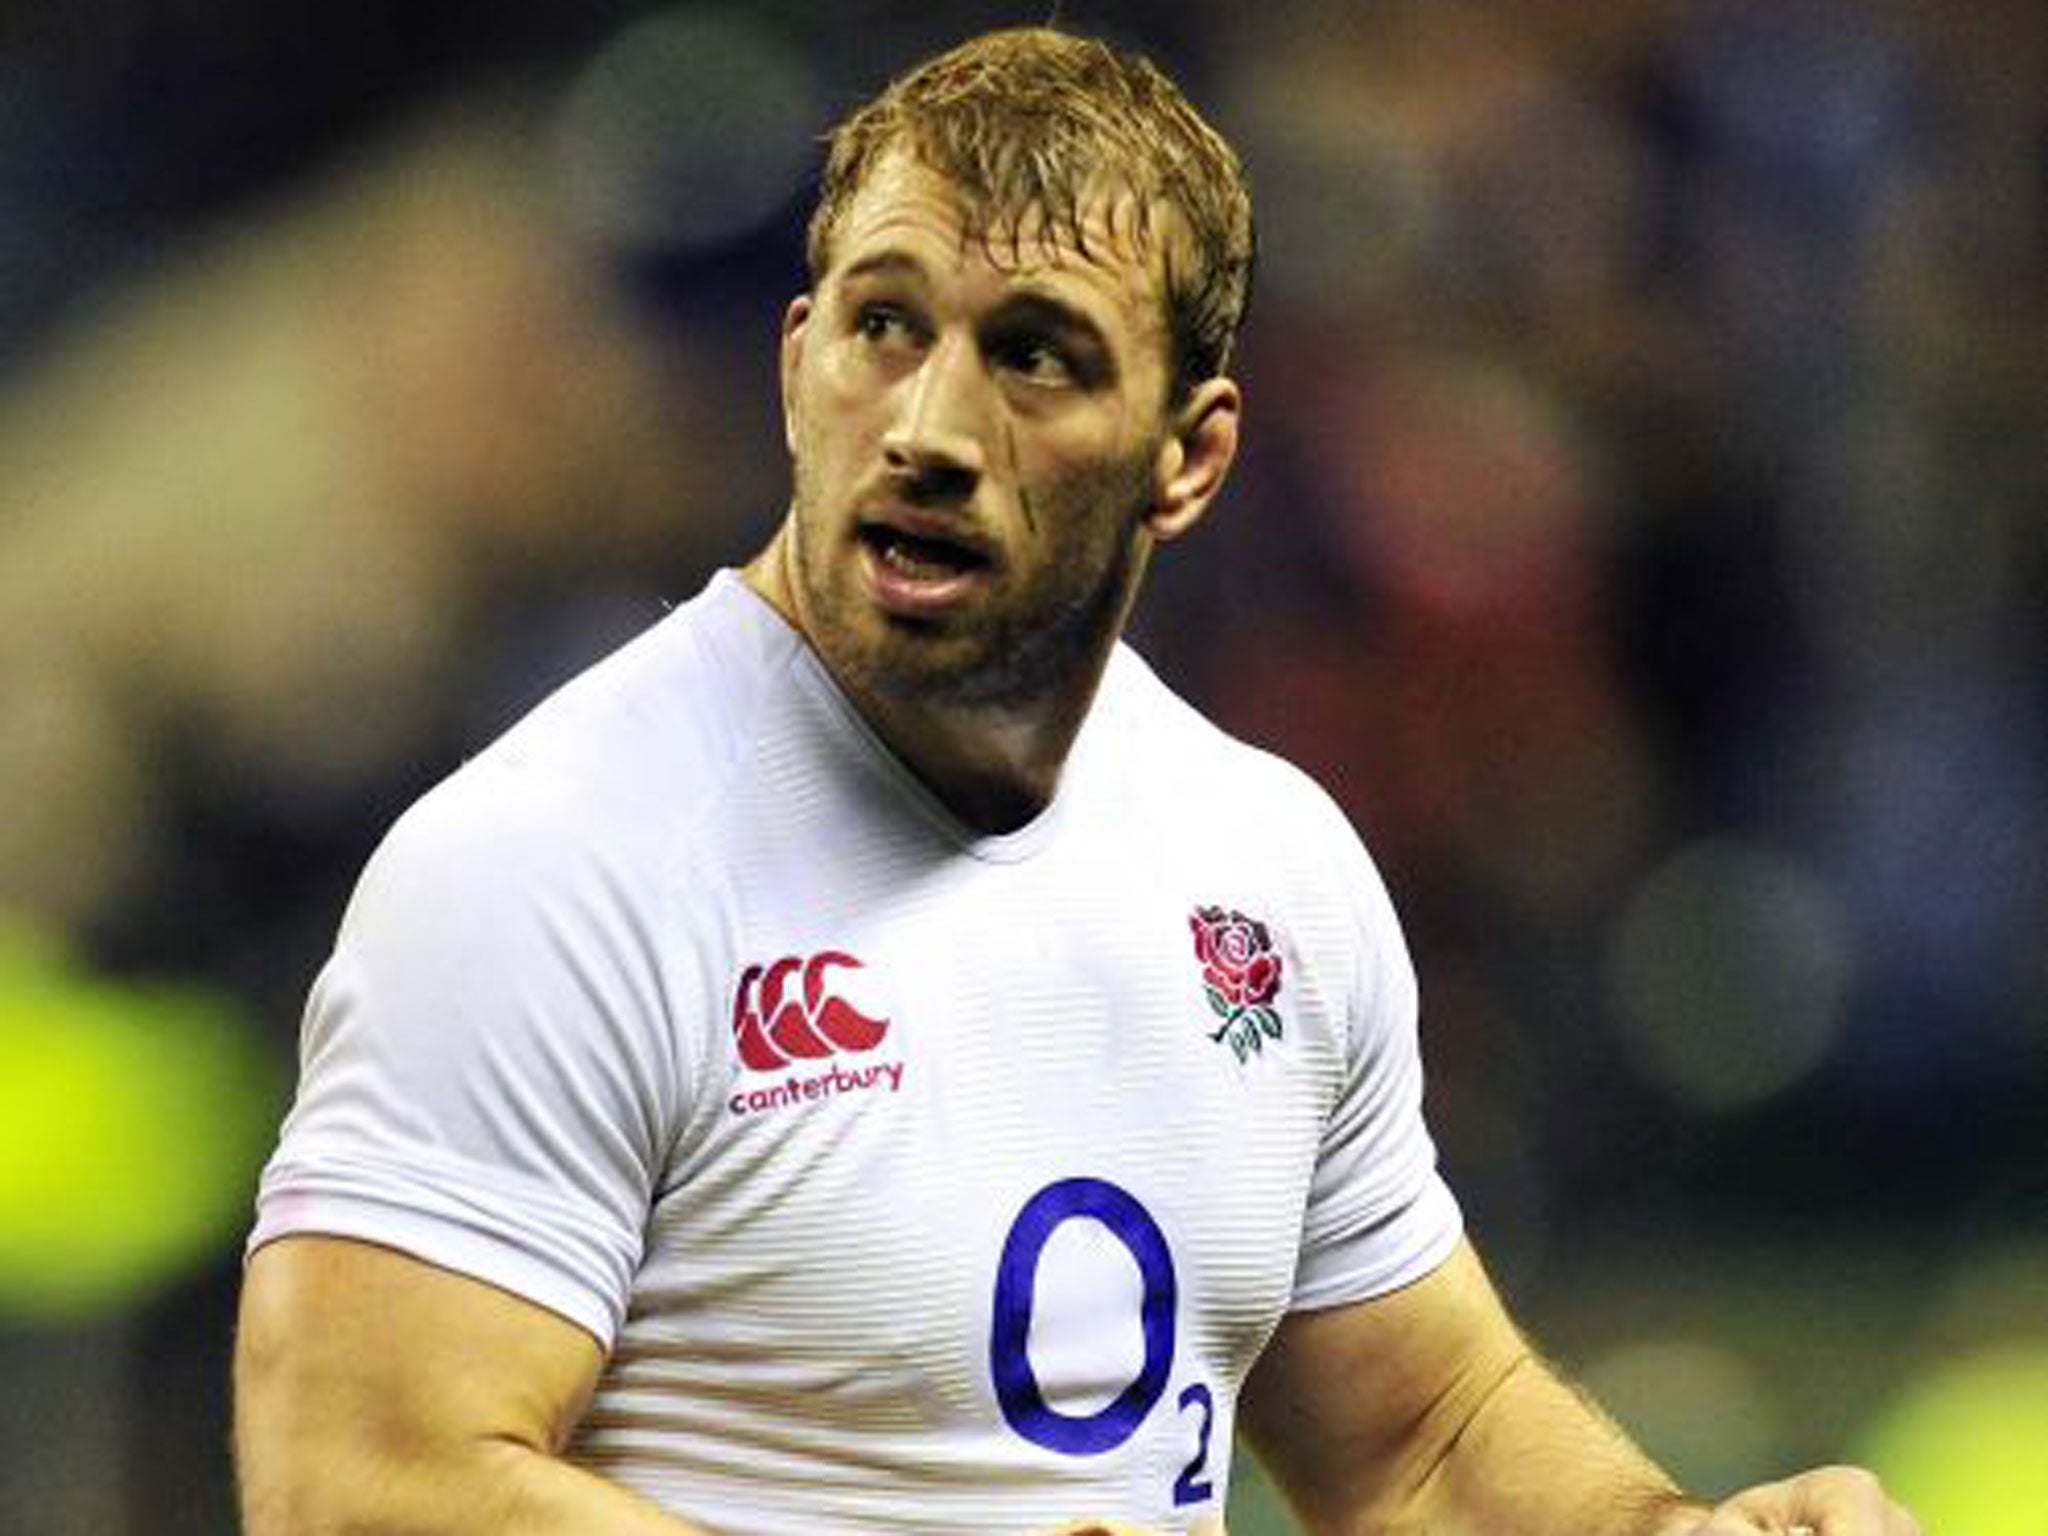 Chris Robshaw has been criticised for his decision-makingChris Robshaw has been criticised for his decision-making